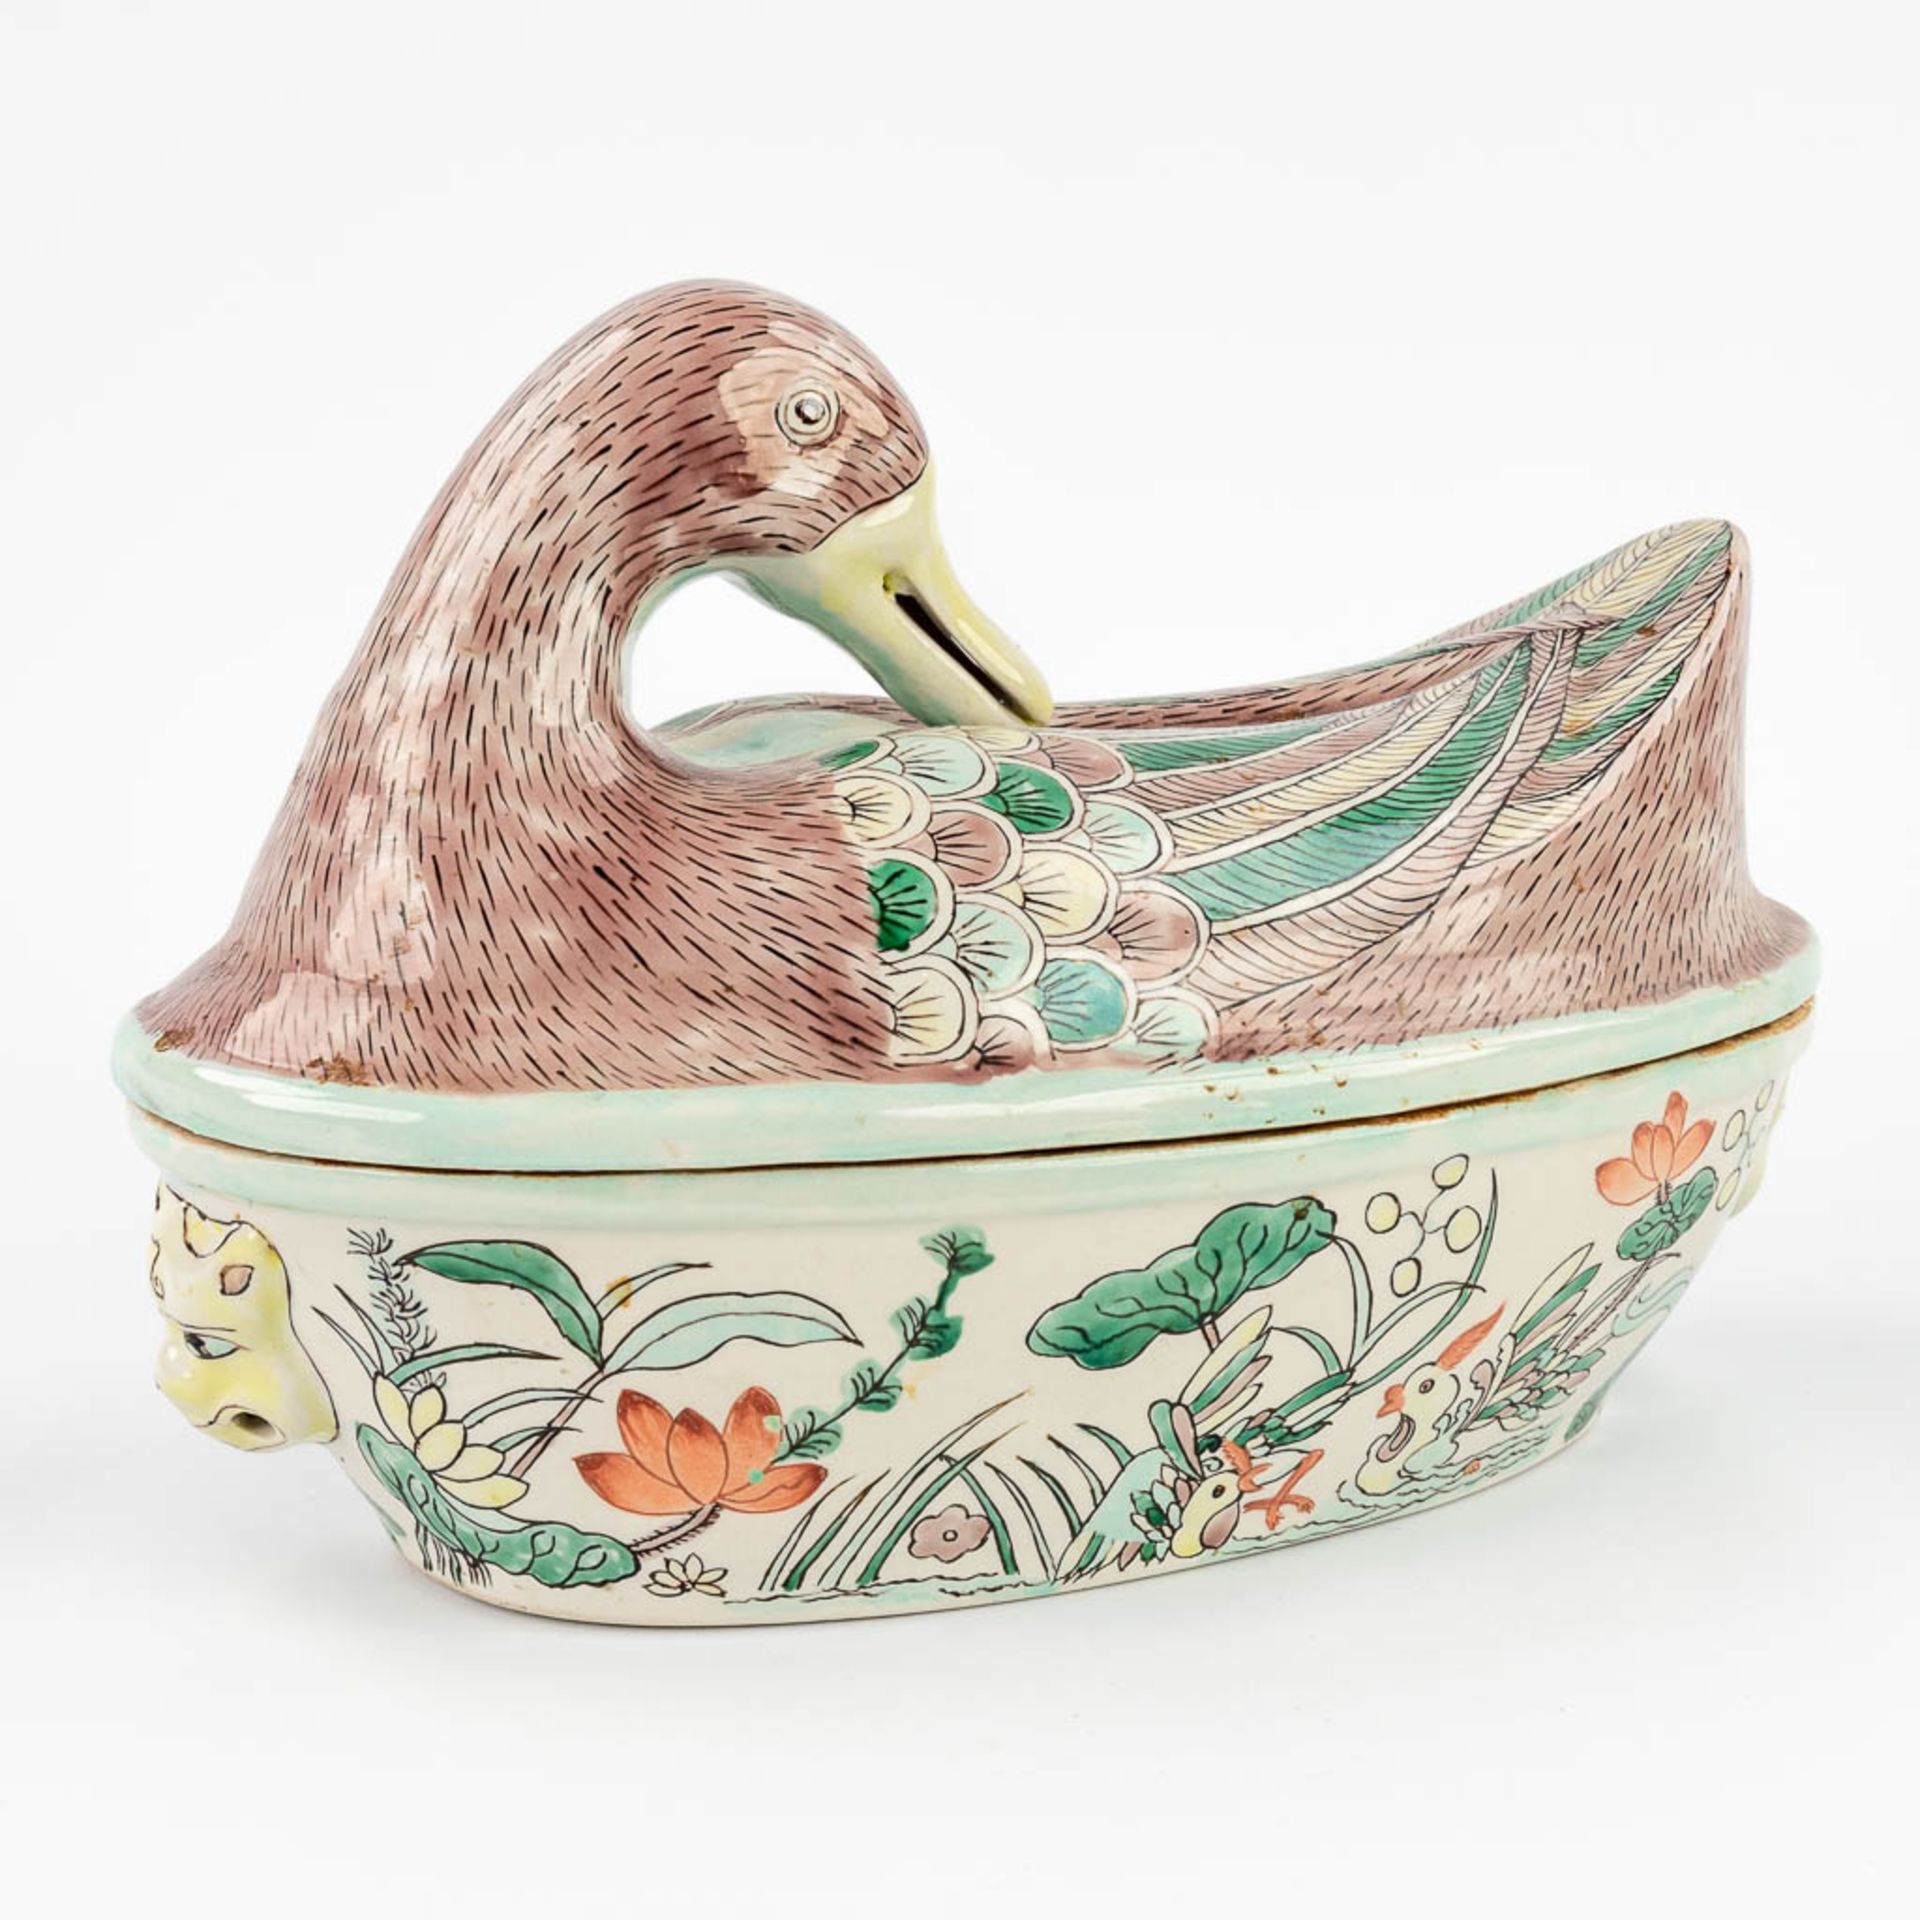 A figurative tureen in the shape of a duck, with hand-painted decor. (17 x 32 x 22cm) - Image 6 of 13